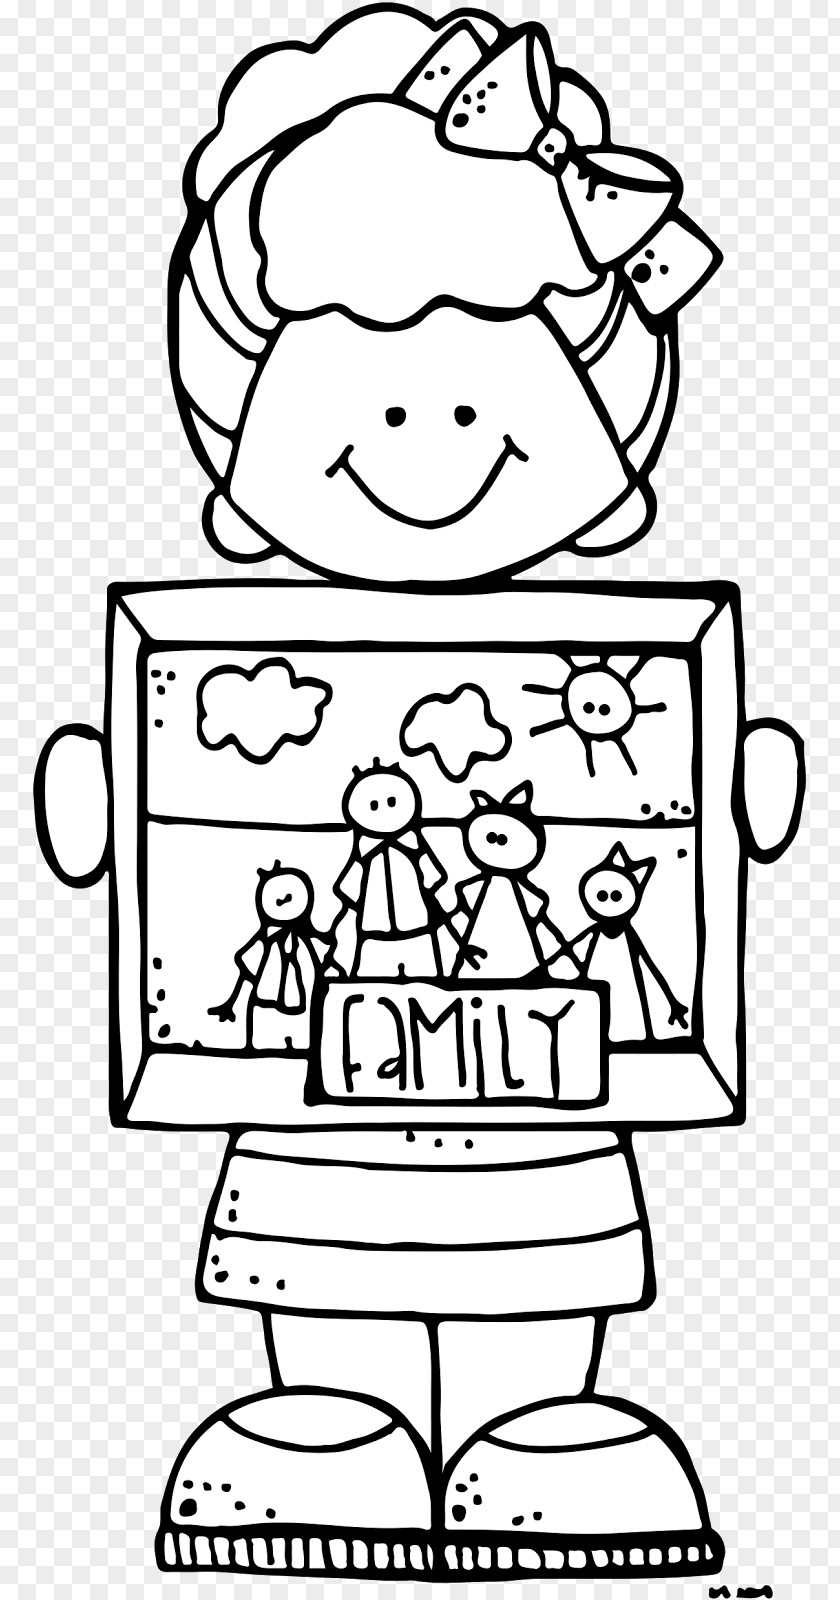 Love Each Other Parent Child Family Clip Art PNG